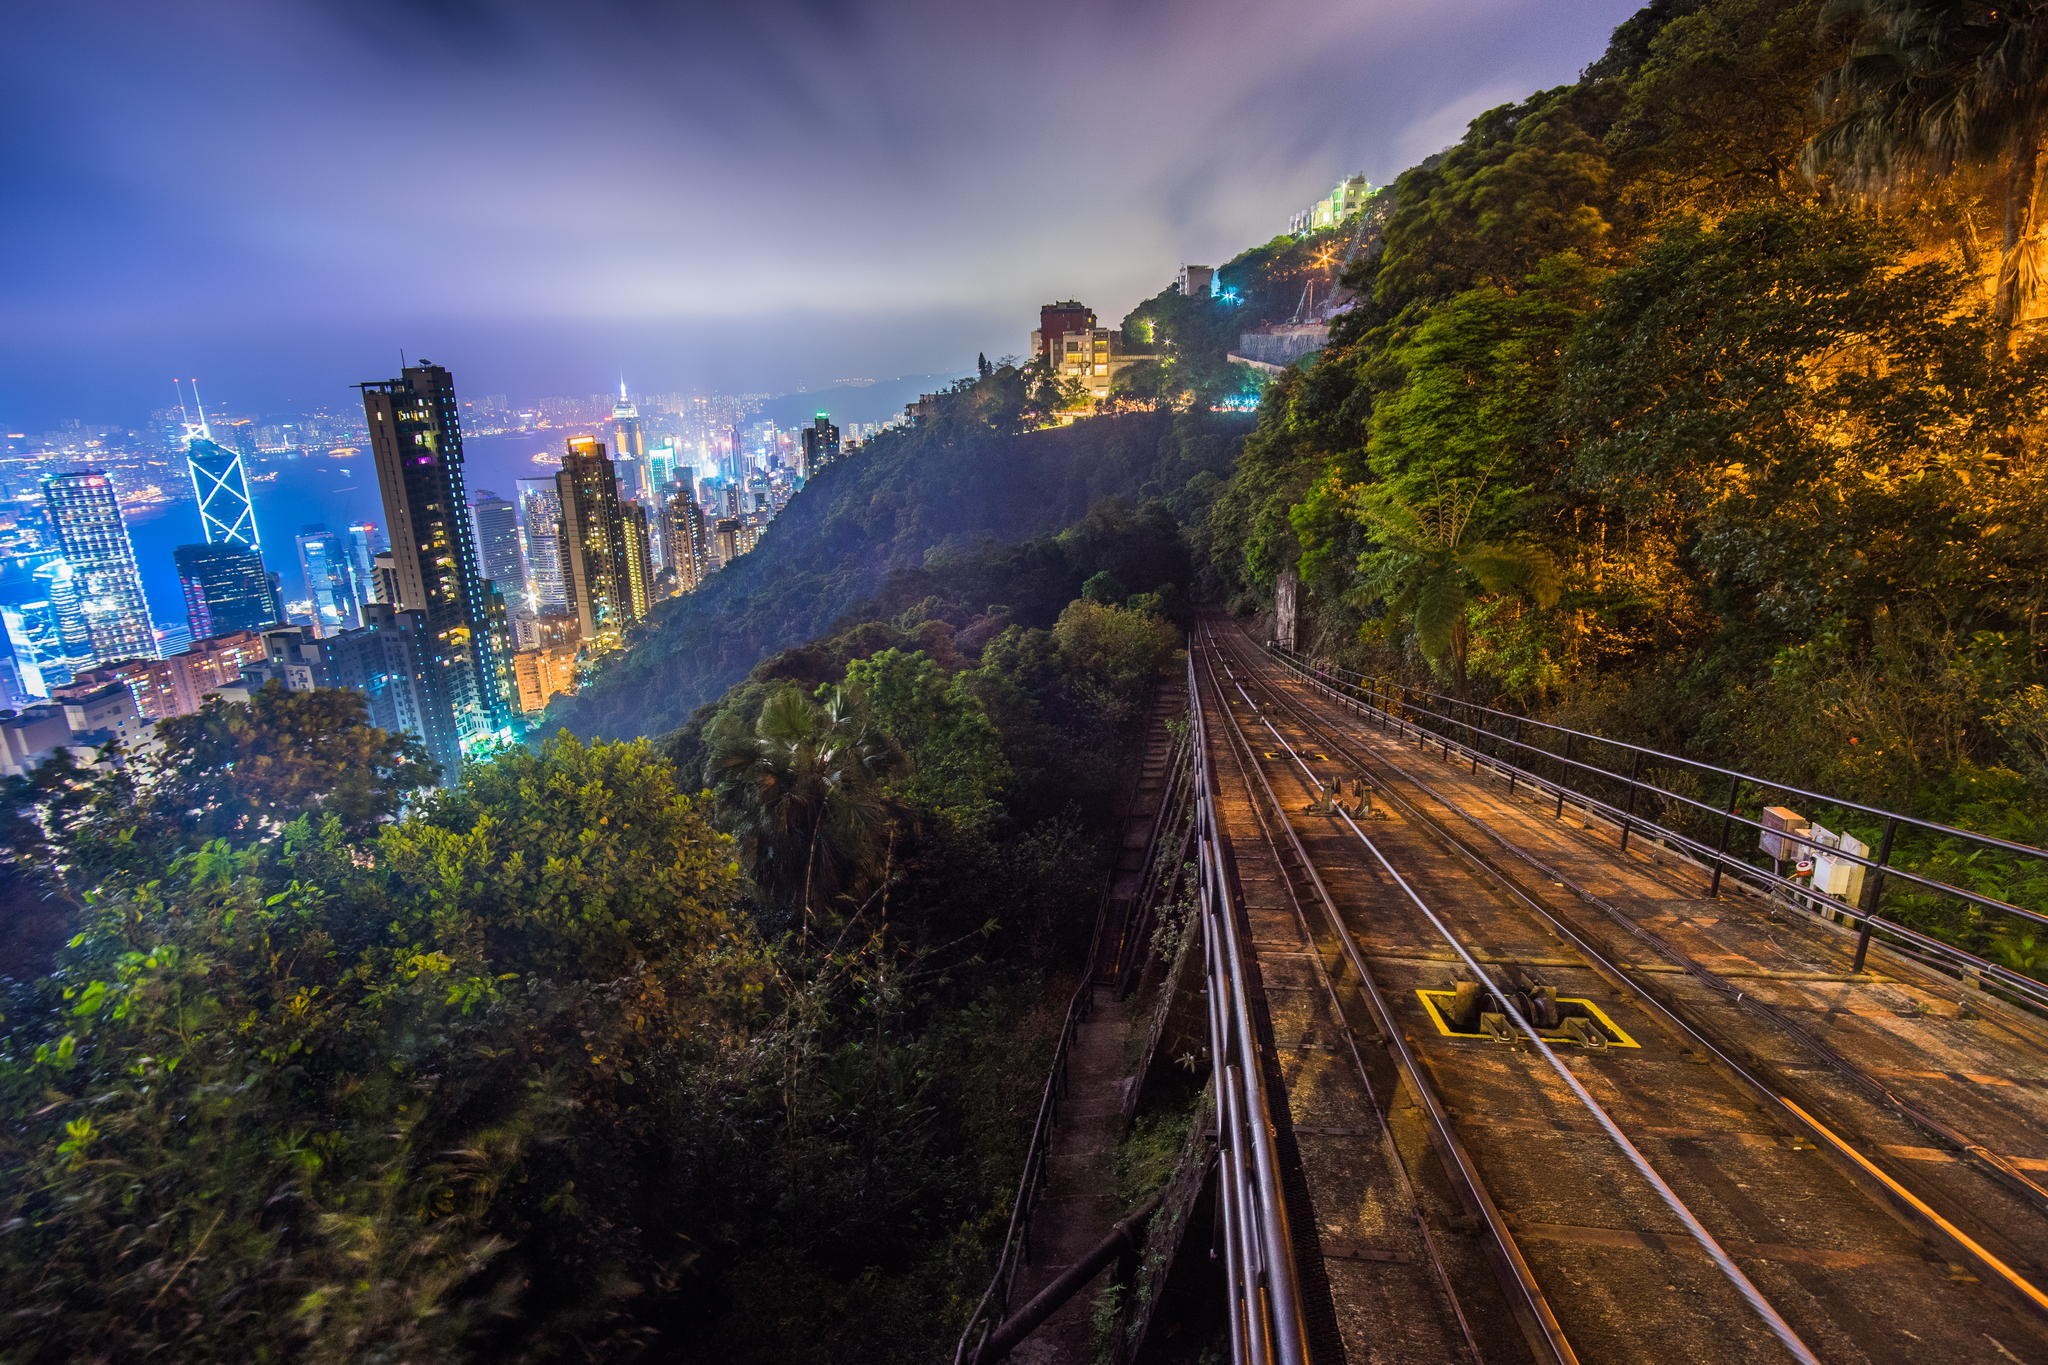 General 2048x1365 forest sky city railway Hong Kong China Asia